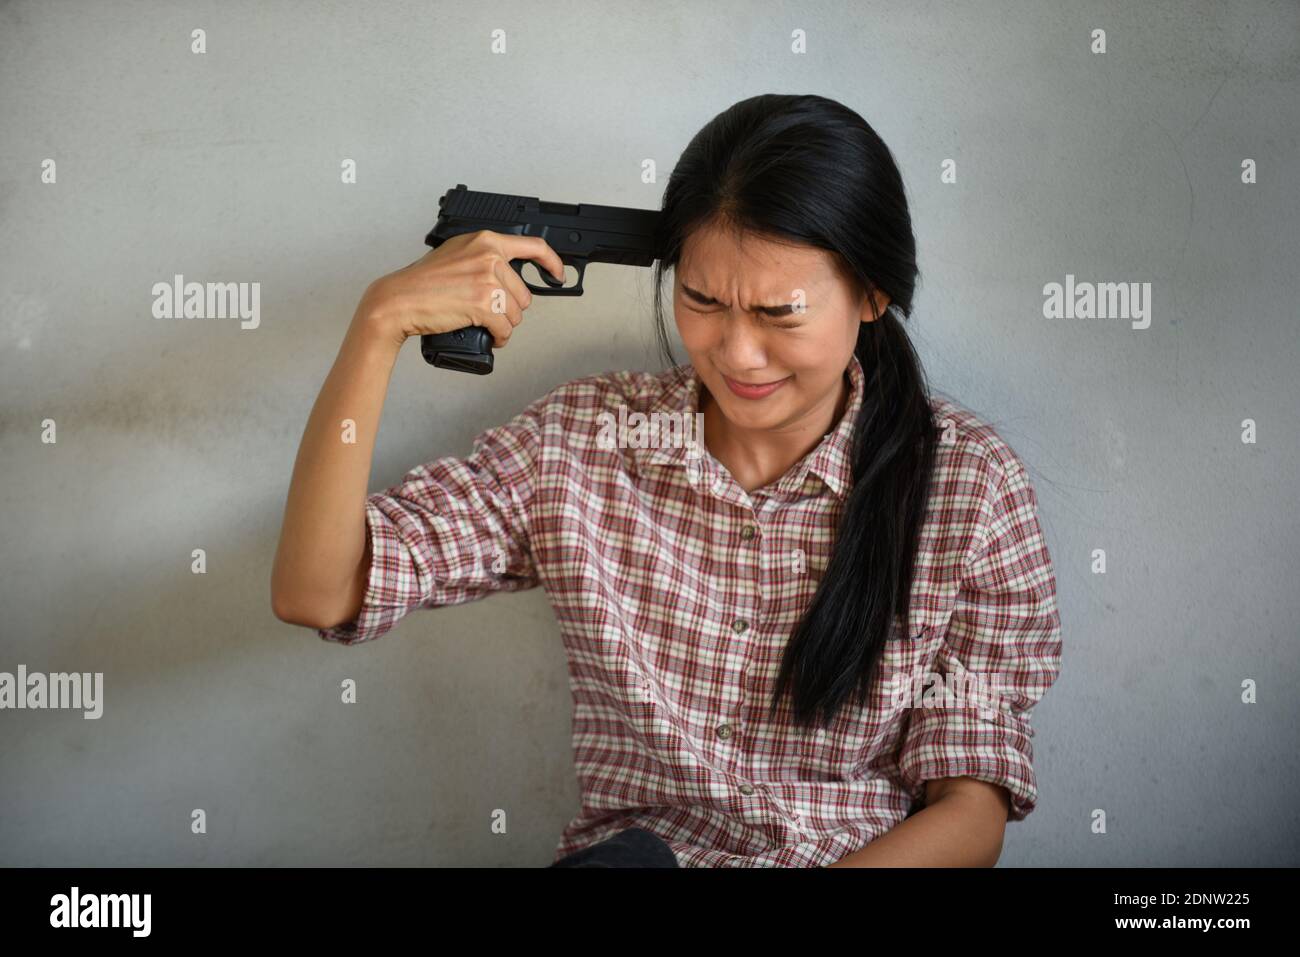 depressed-young-woman-holding-gun-on-head-against-wall-2DNW225.jpg